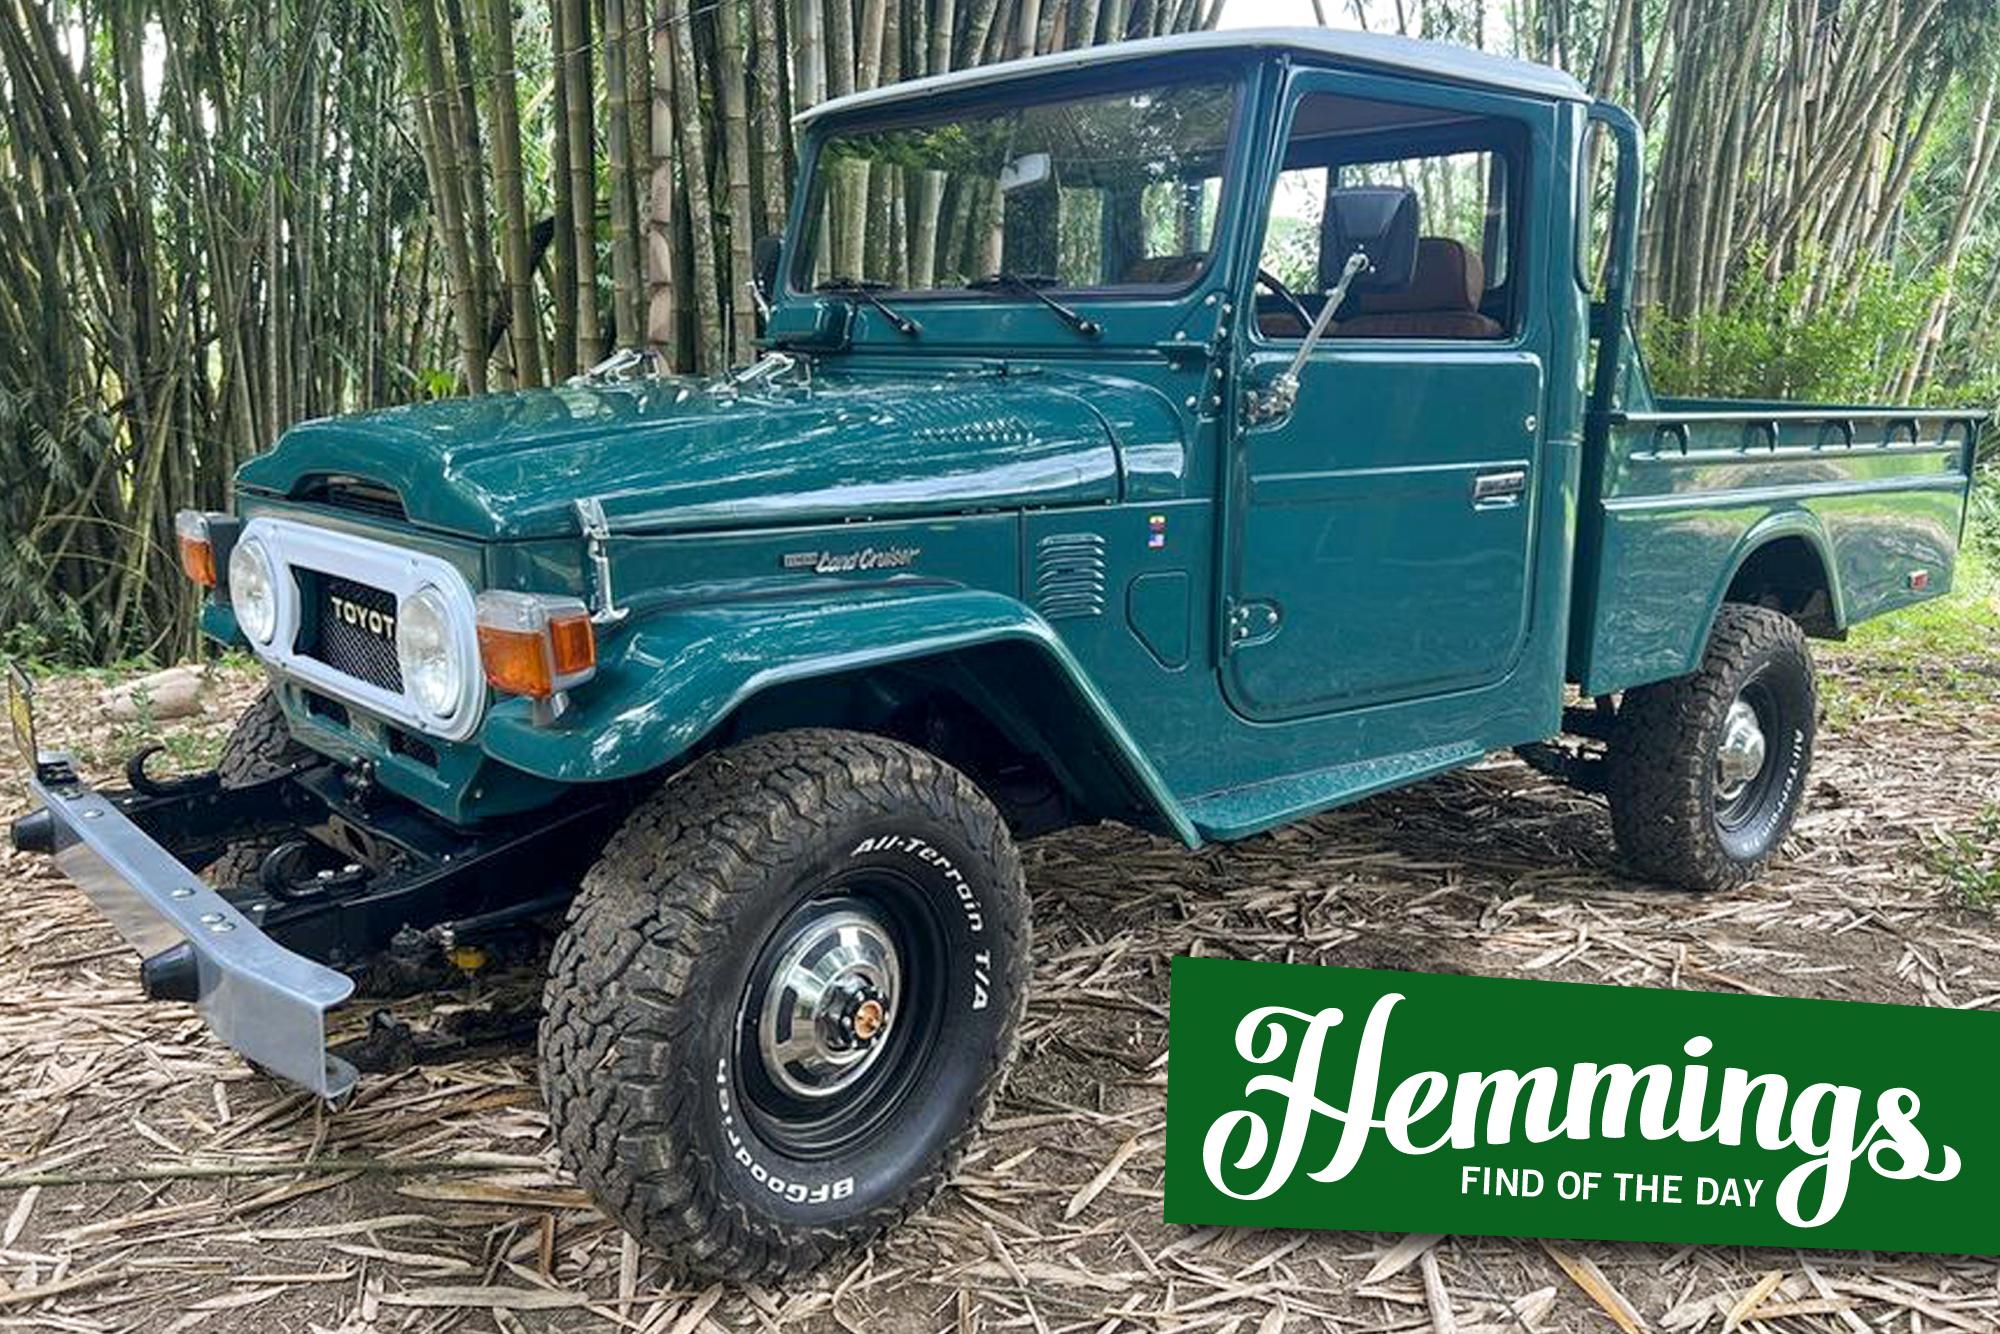 Full restoration on this 1978 Toyota FJ45 Land Cruiser might not be flashy but sure is spectacular